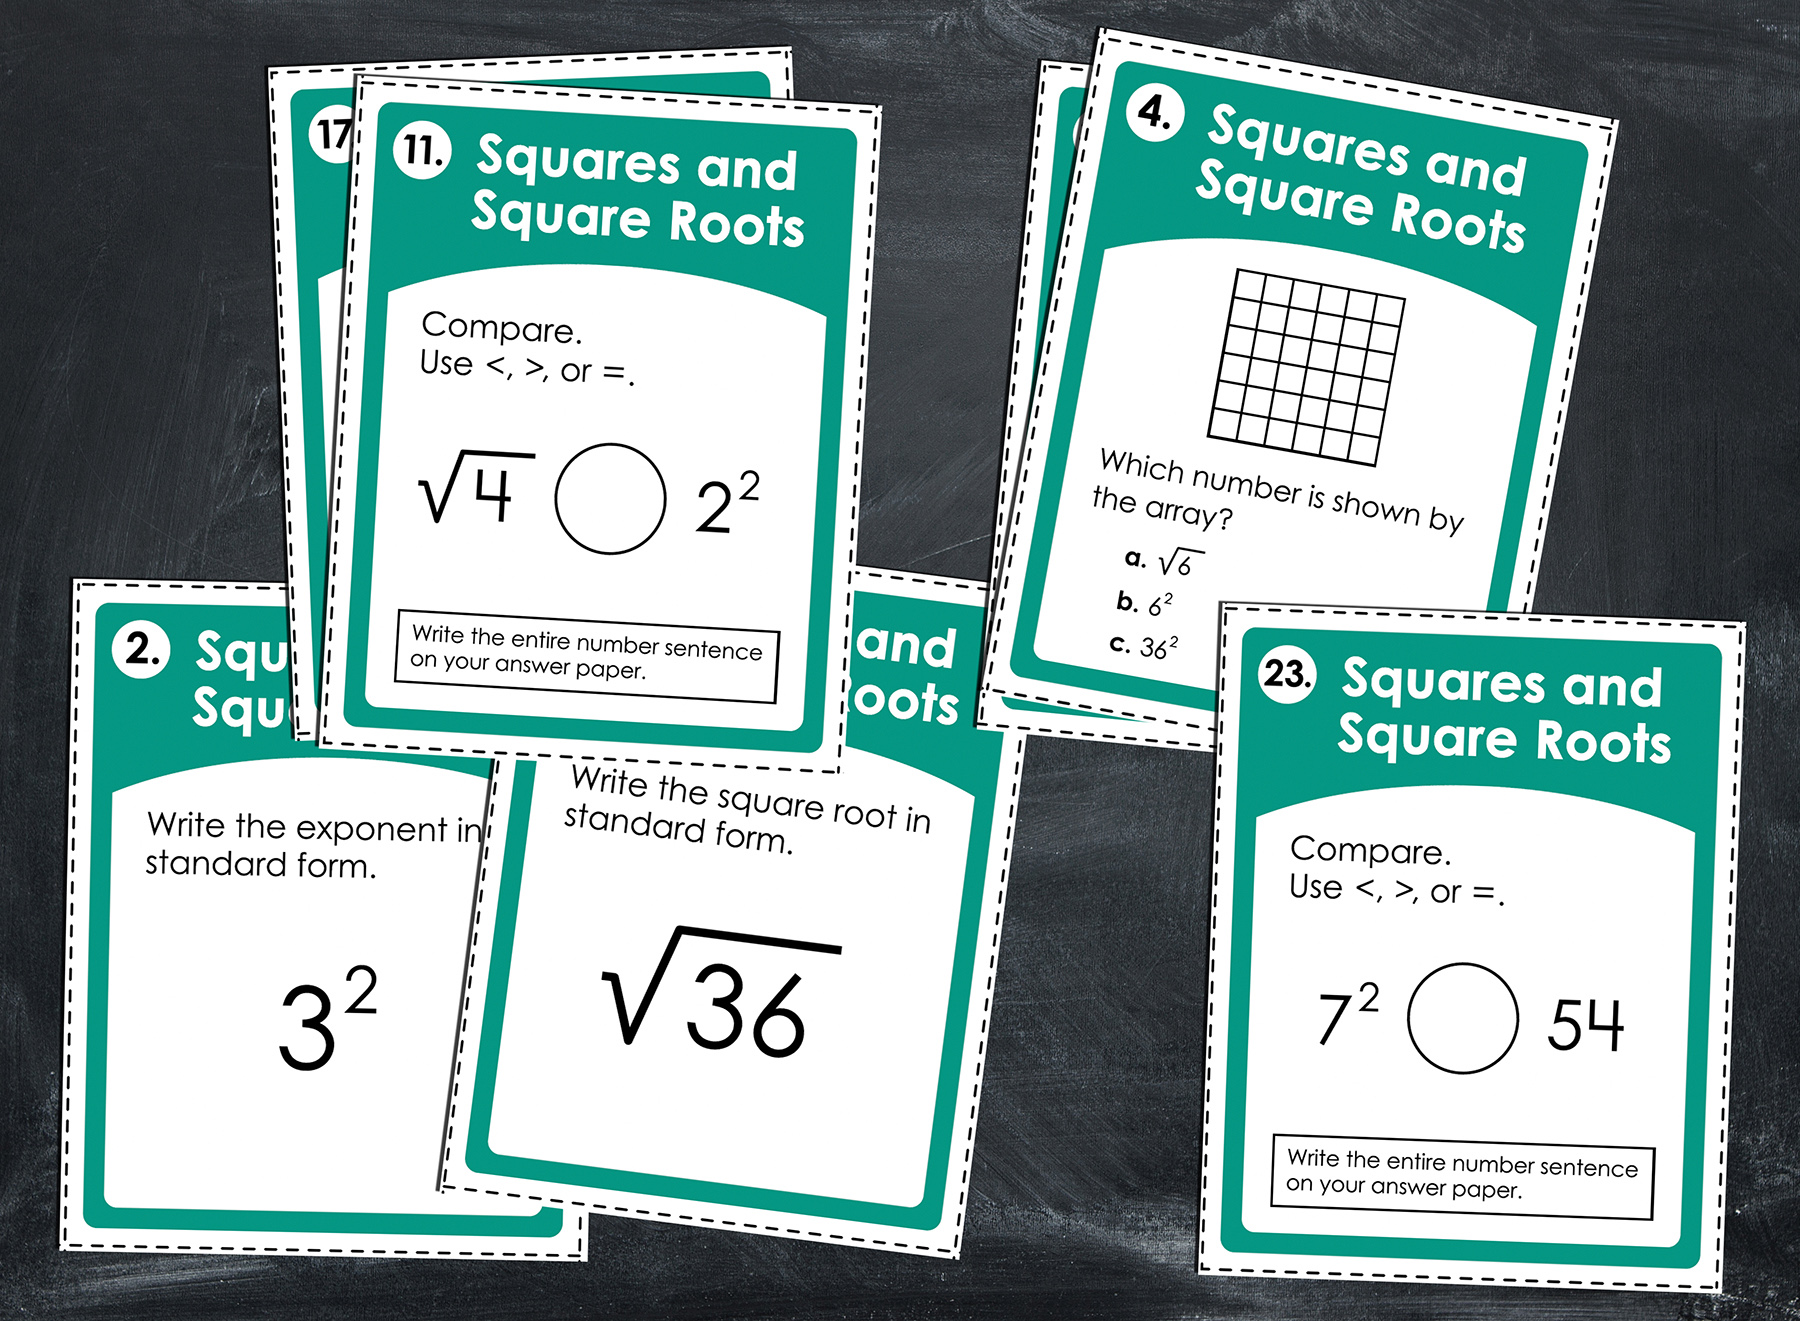 Small Group Review with Task Cards